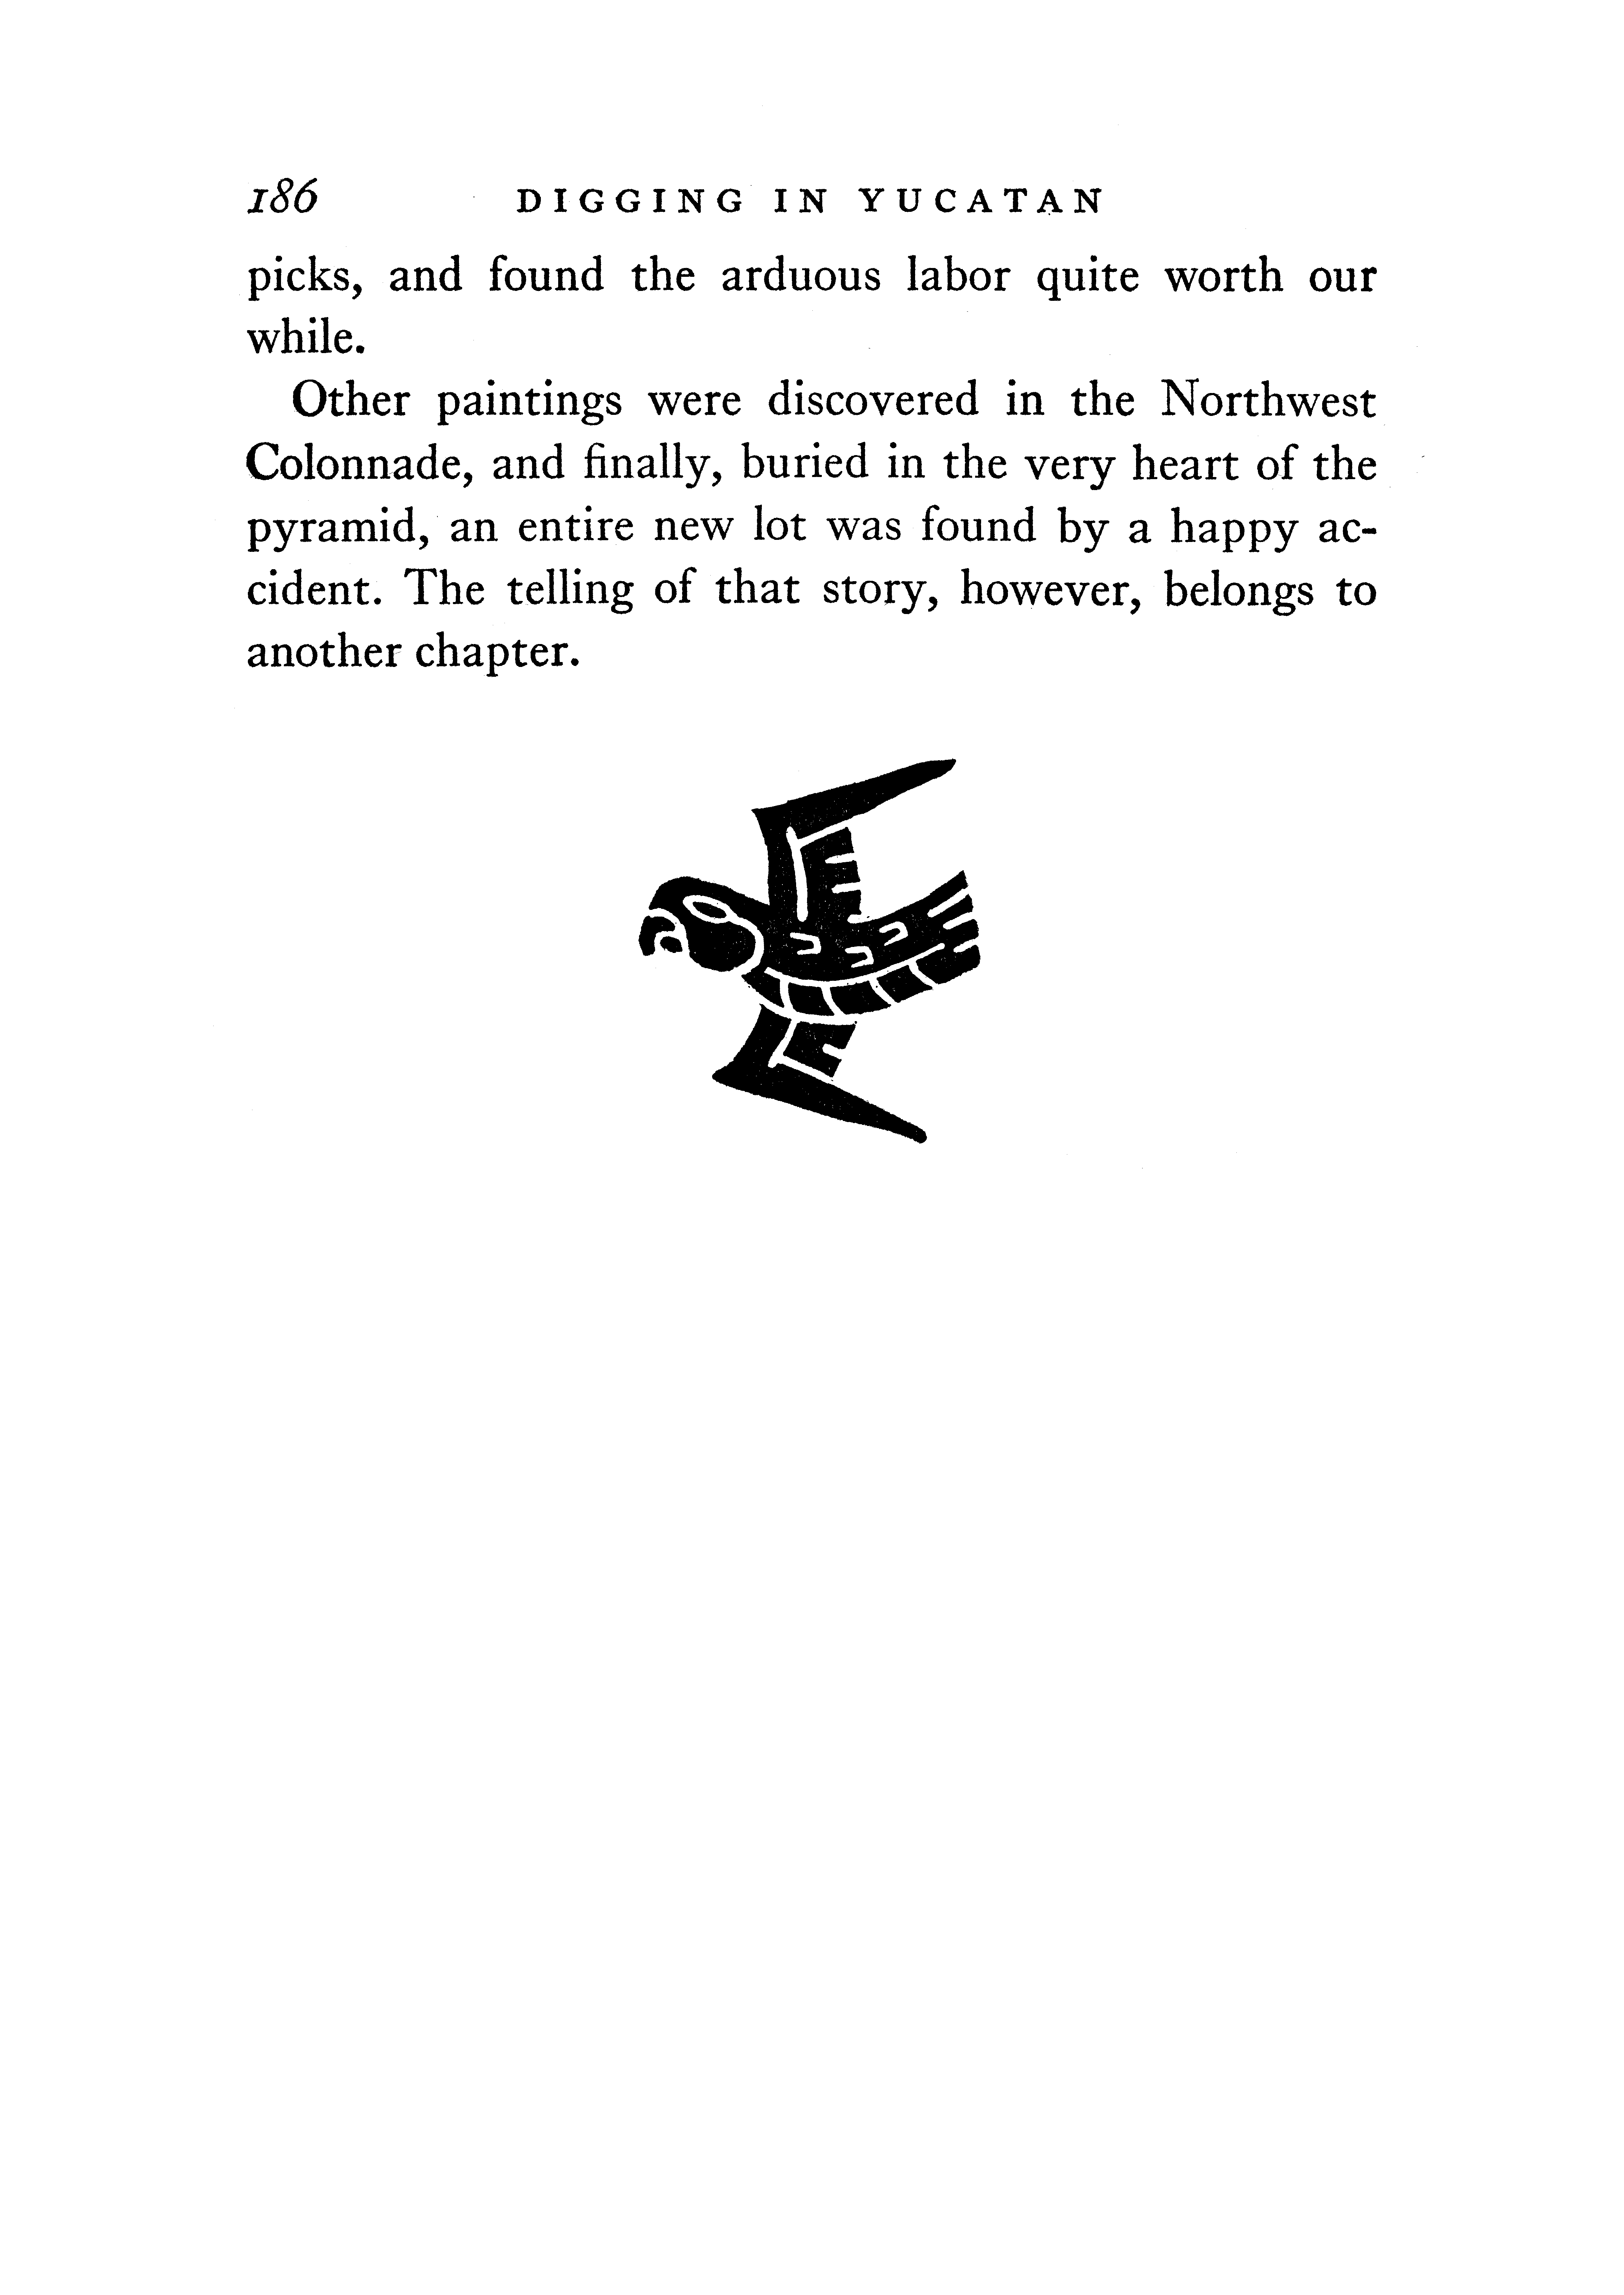 Page 186 of 'Digging in Yucatan' written by Ann Axtell Morris.  Decorations by Jean Charlot.